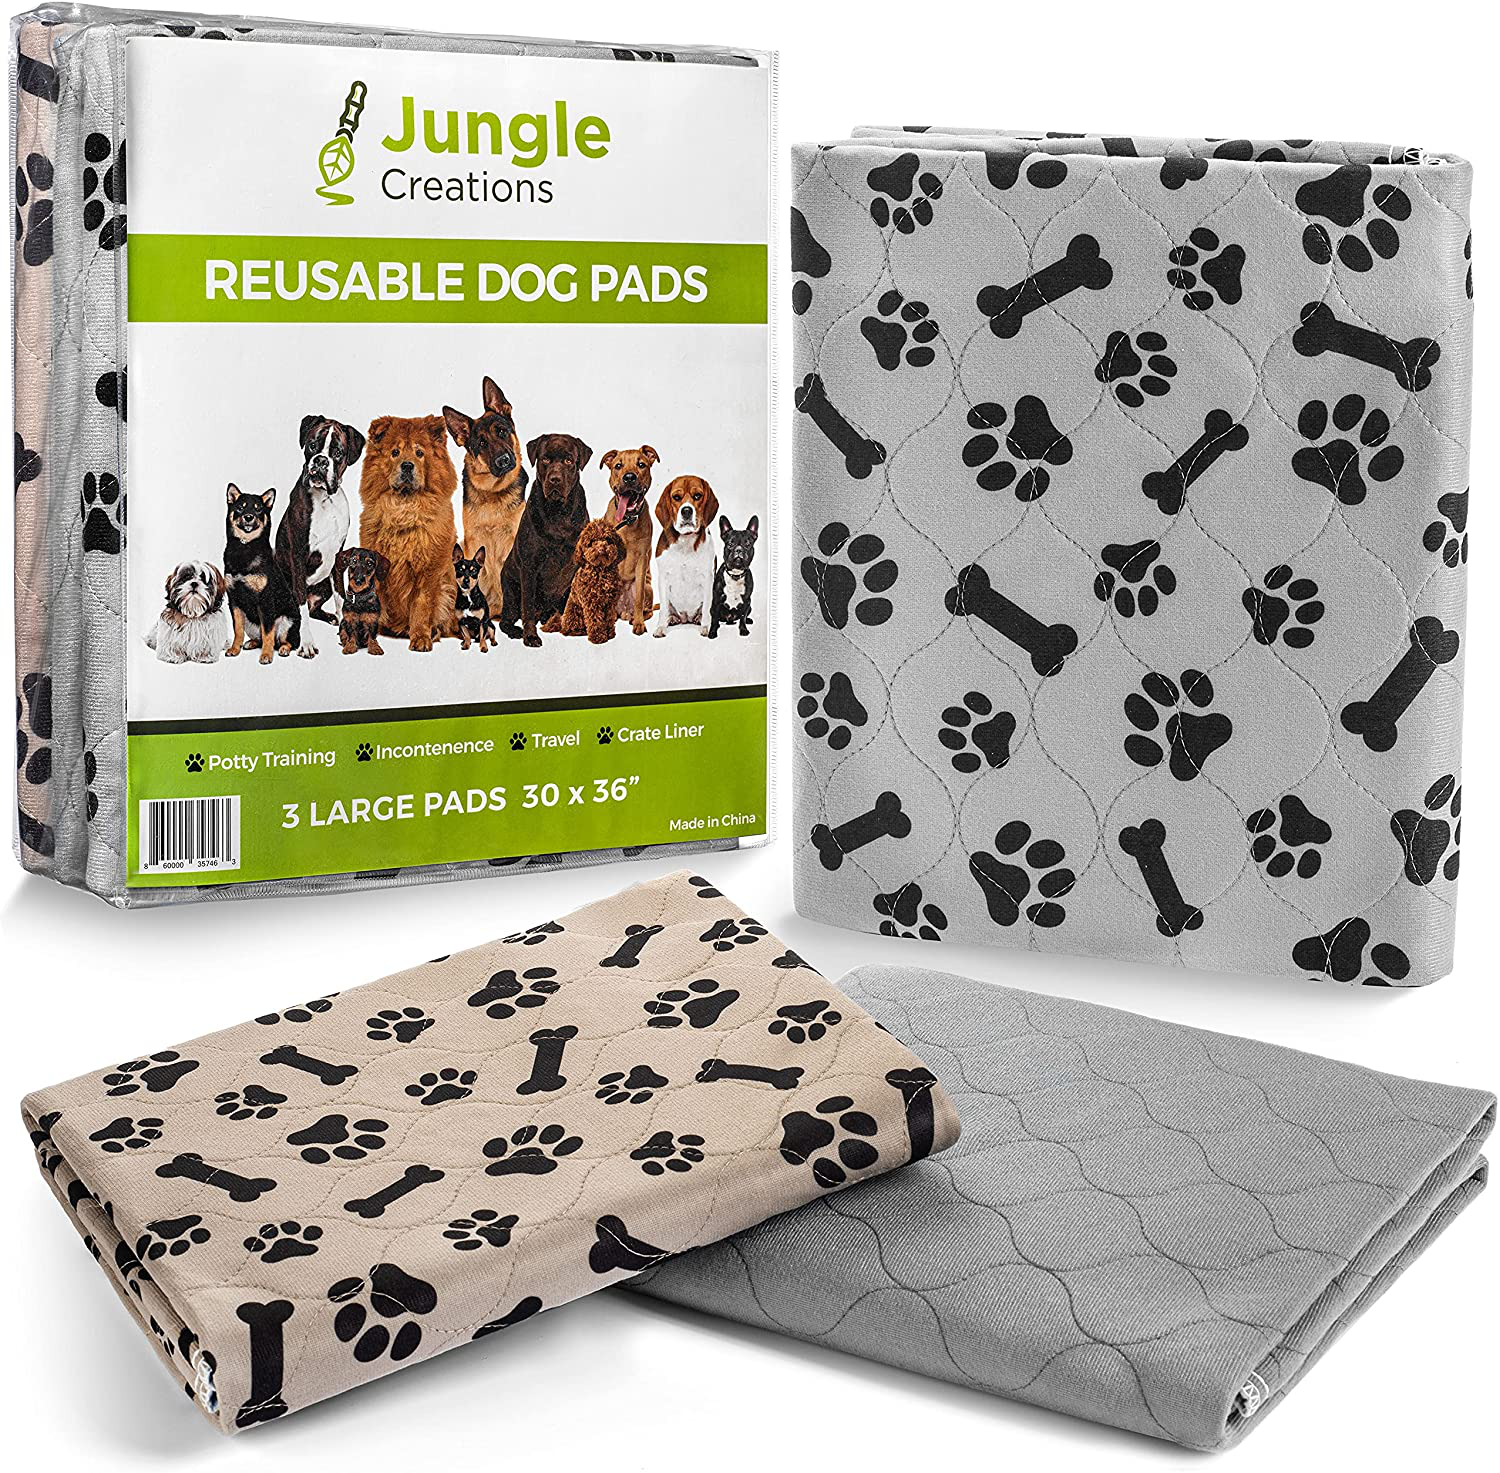 Washable Dog Pee Pads, Reusable Puppy Toilet Training Pads, High